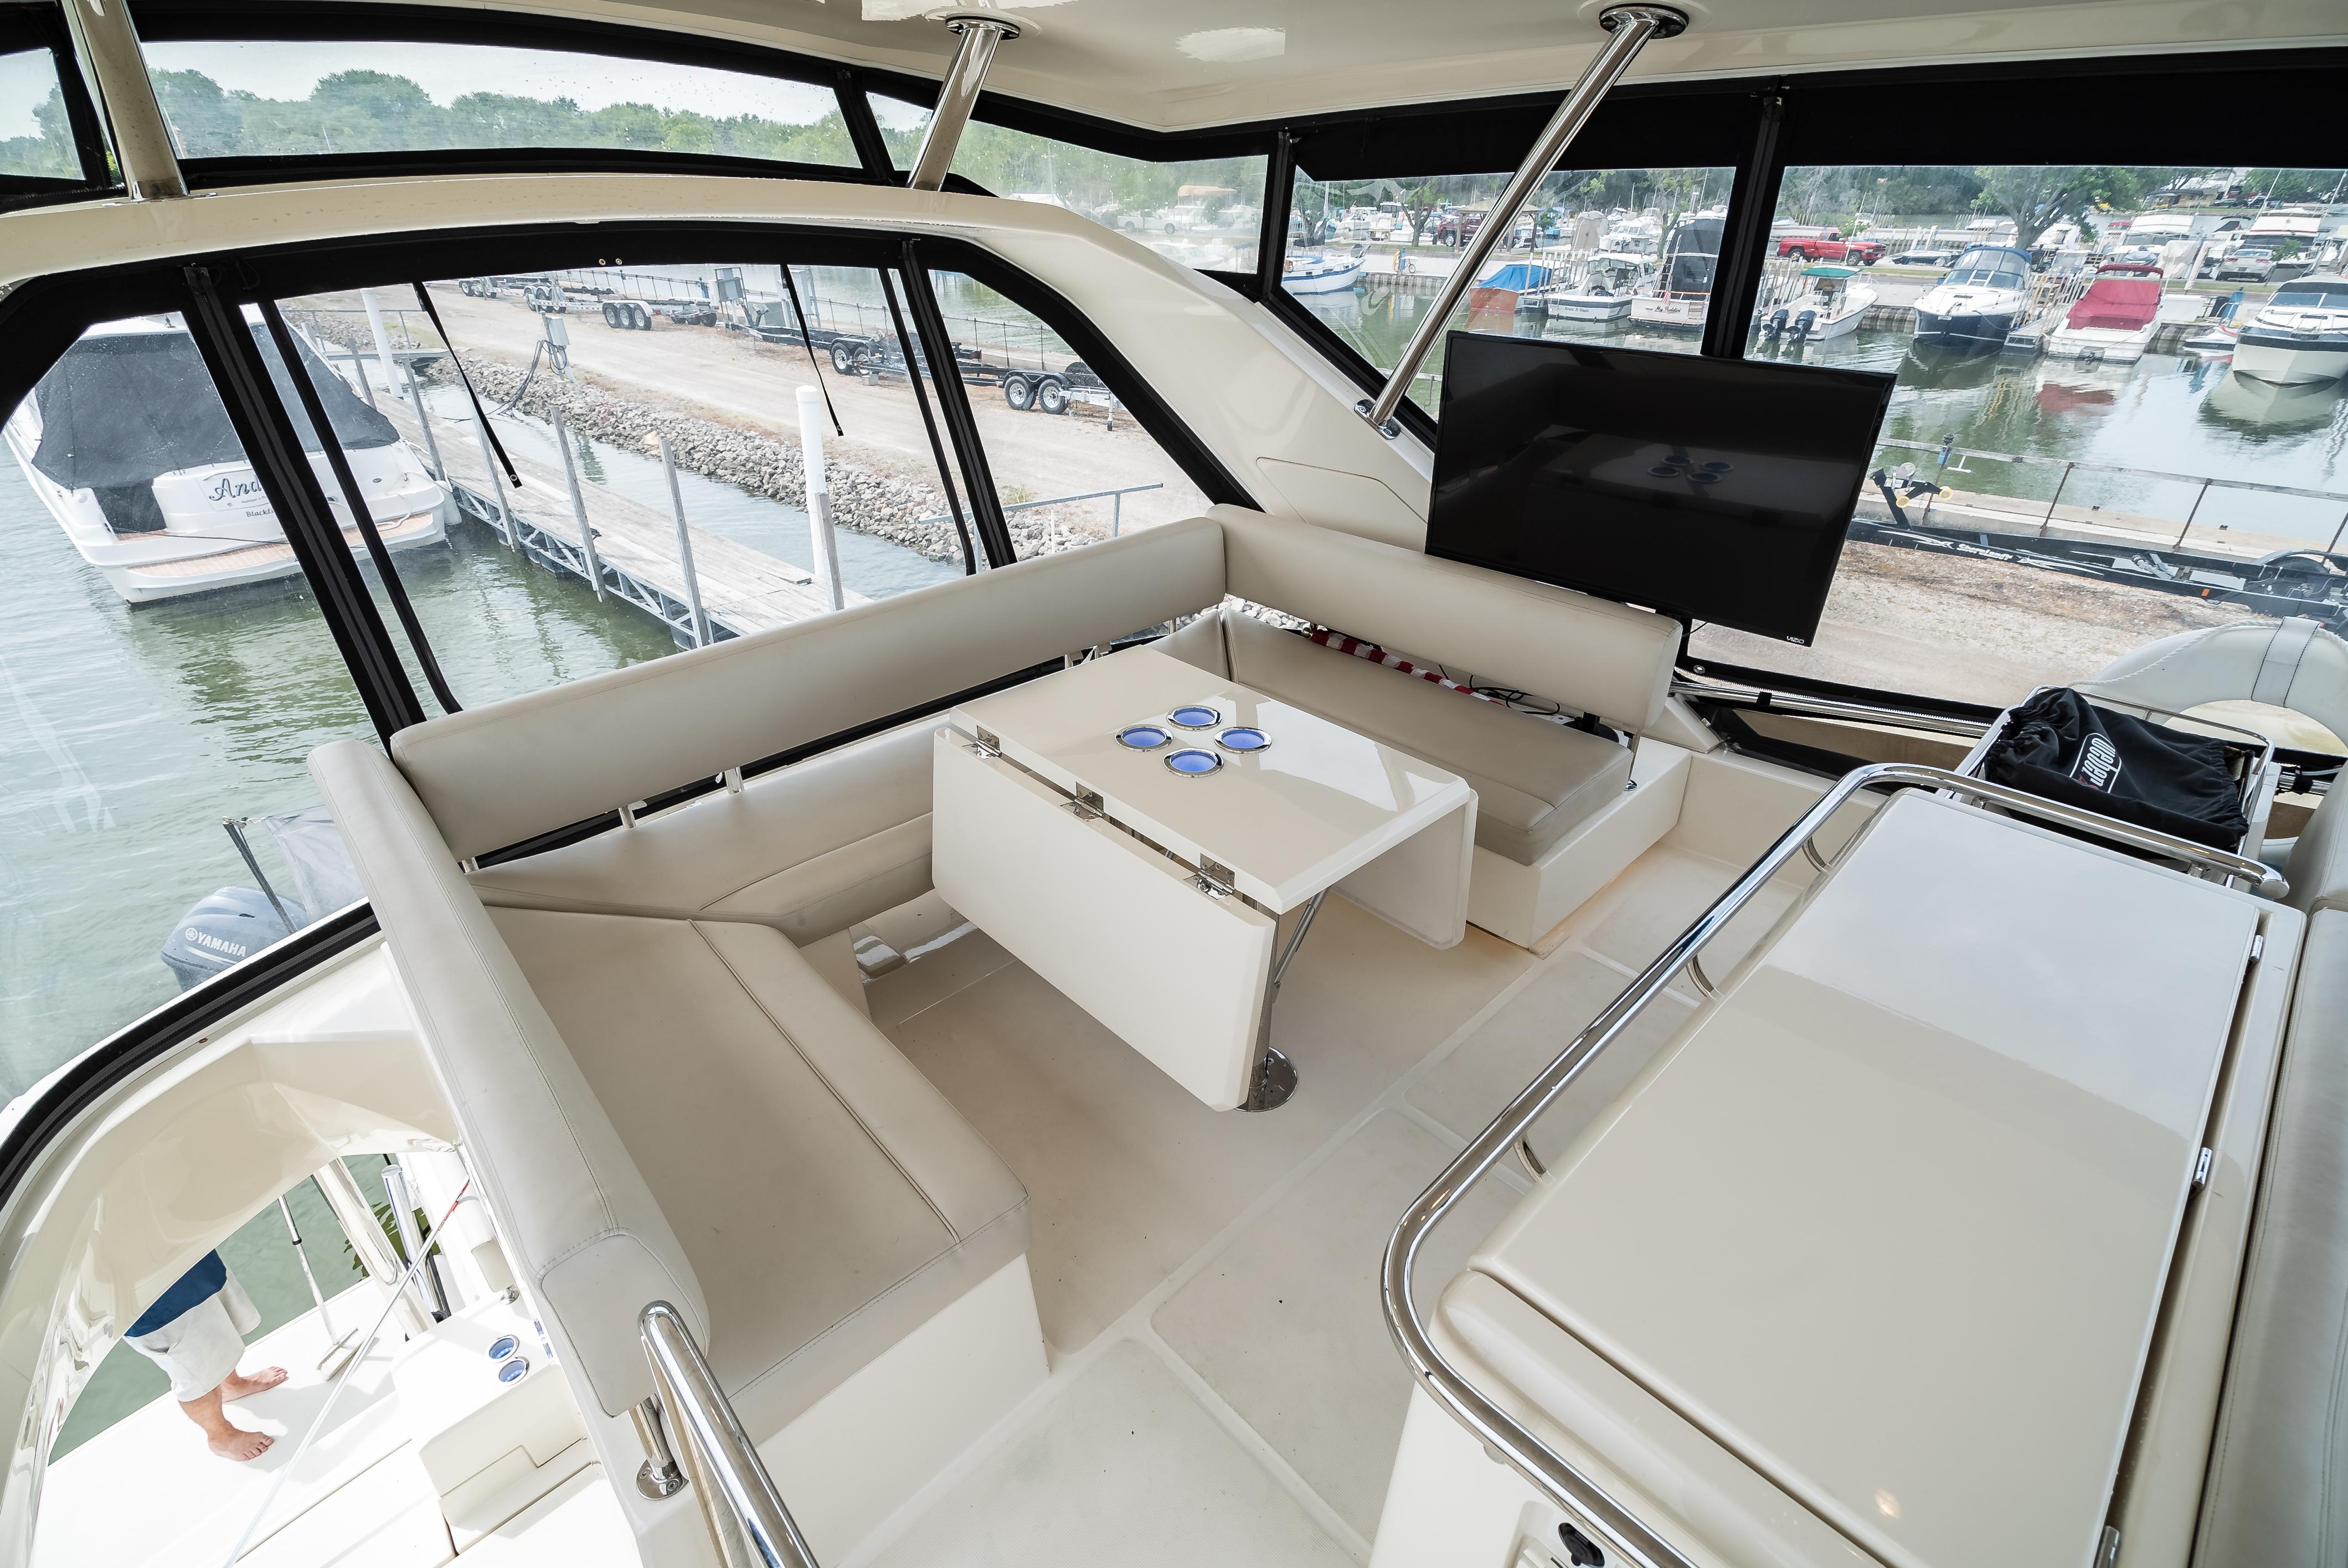 Flybridge aft No privacy curtains up